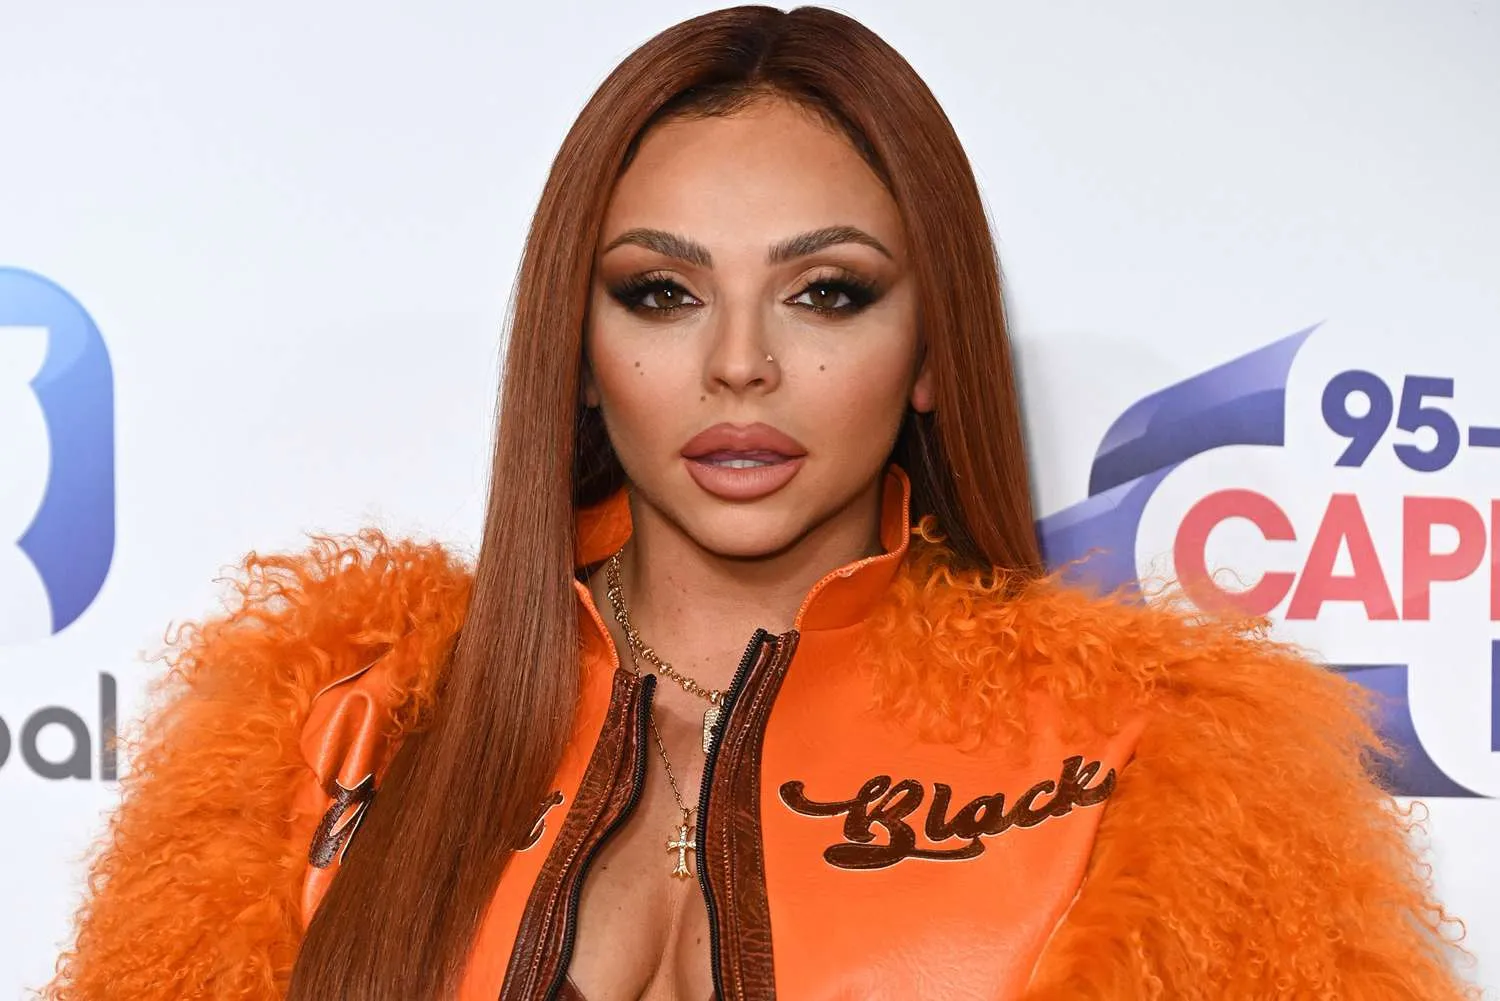 Why Did Jesy Leave Little Mix?